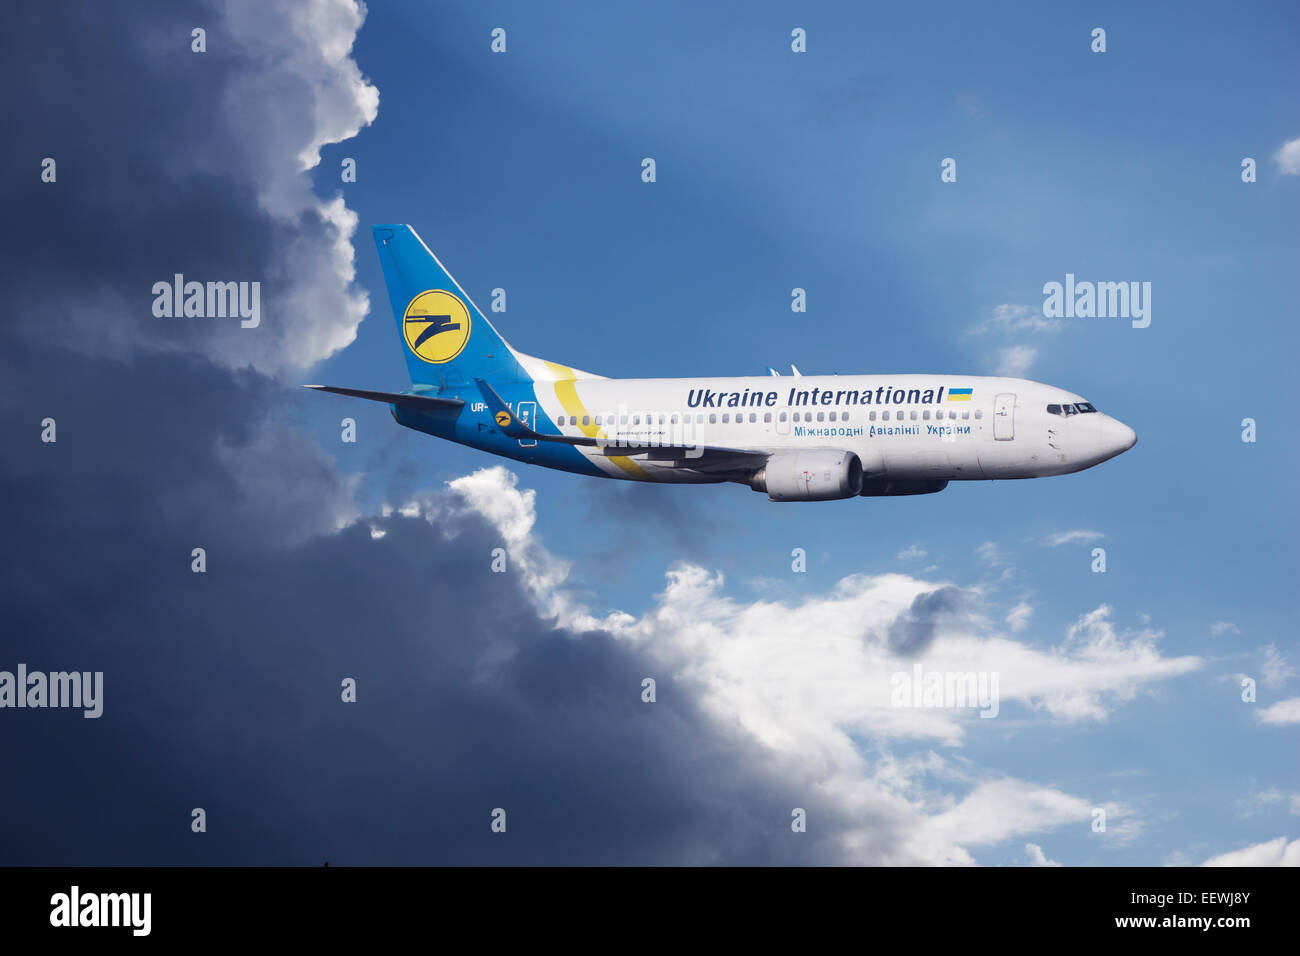 Ukraine International Airlines, Boeing 737-500 in flight during a thunderstorm Stock Photo